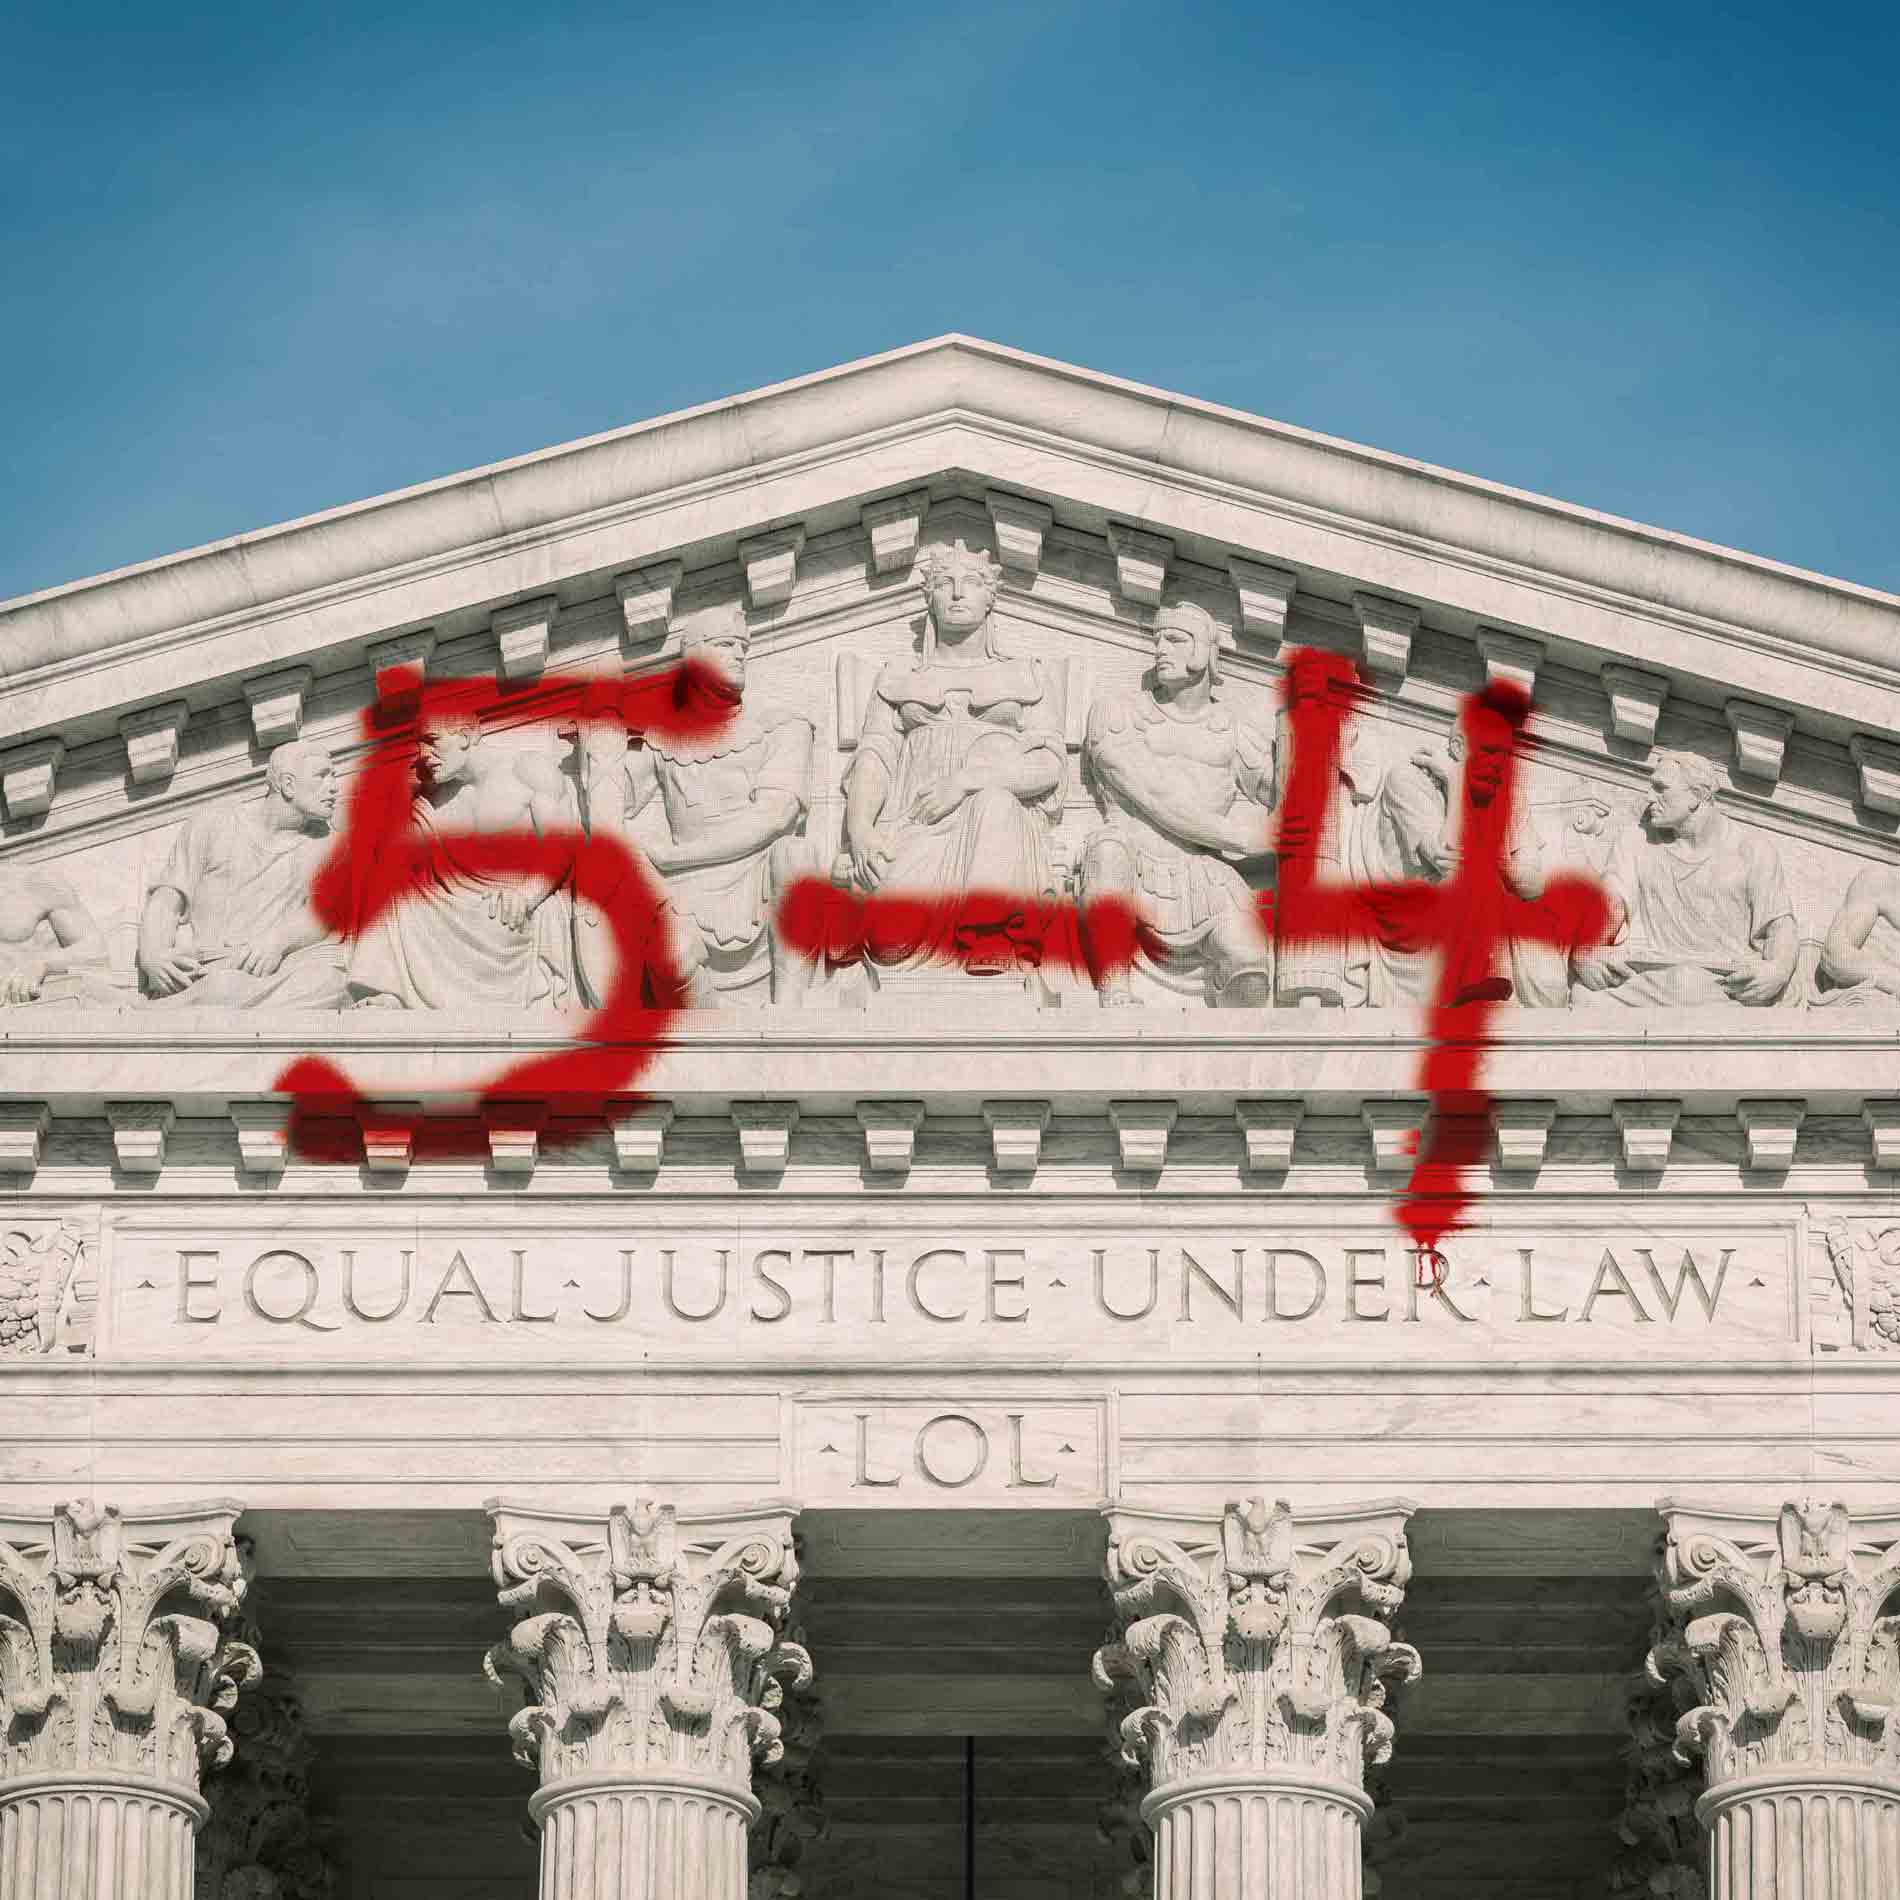 5-4 TAKES A SPECIAL LOOK AT THE SUPREME COURT’S ROLE IN THE UPCOMING PRESIDENTIAL ELECTION